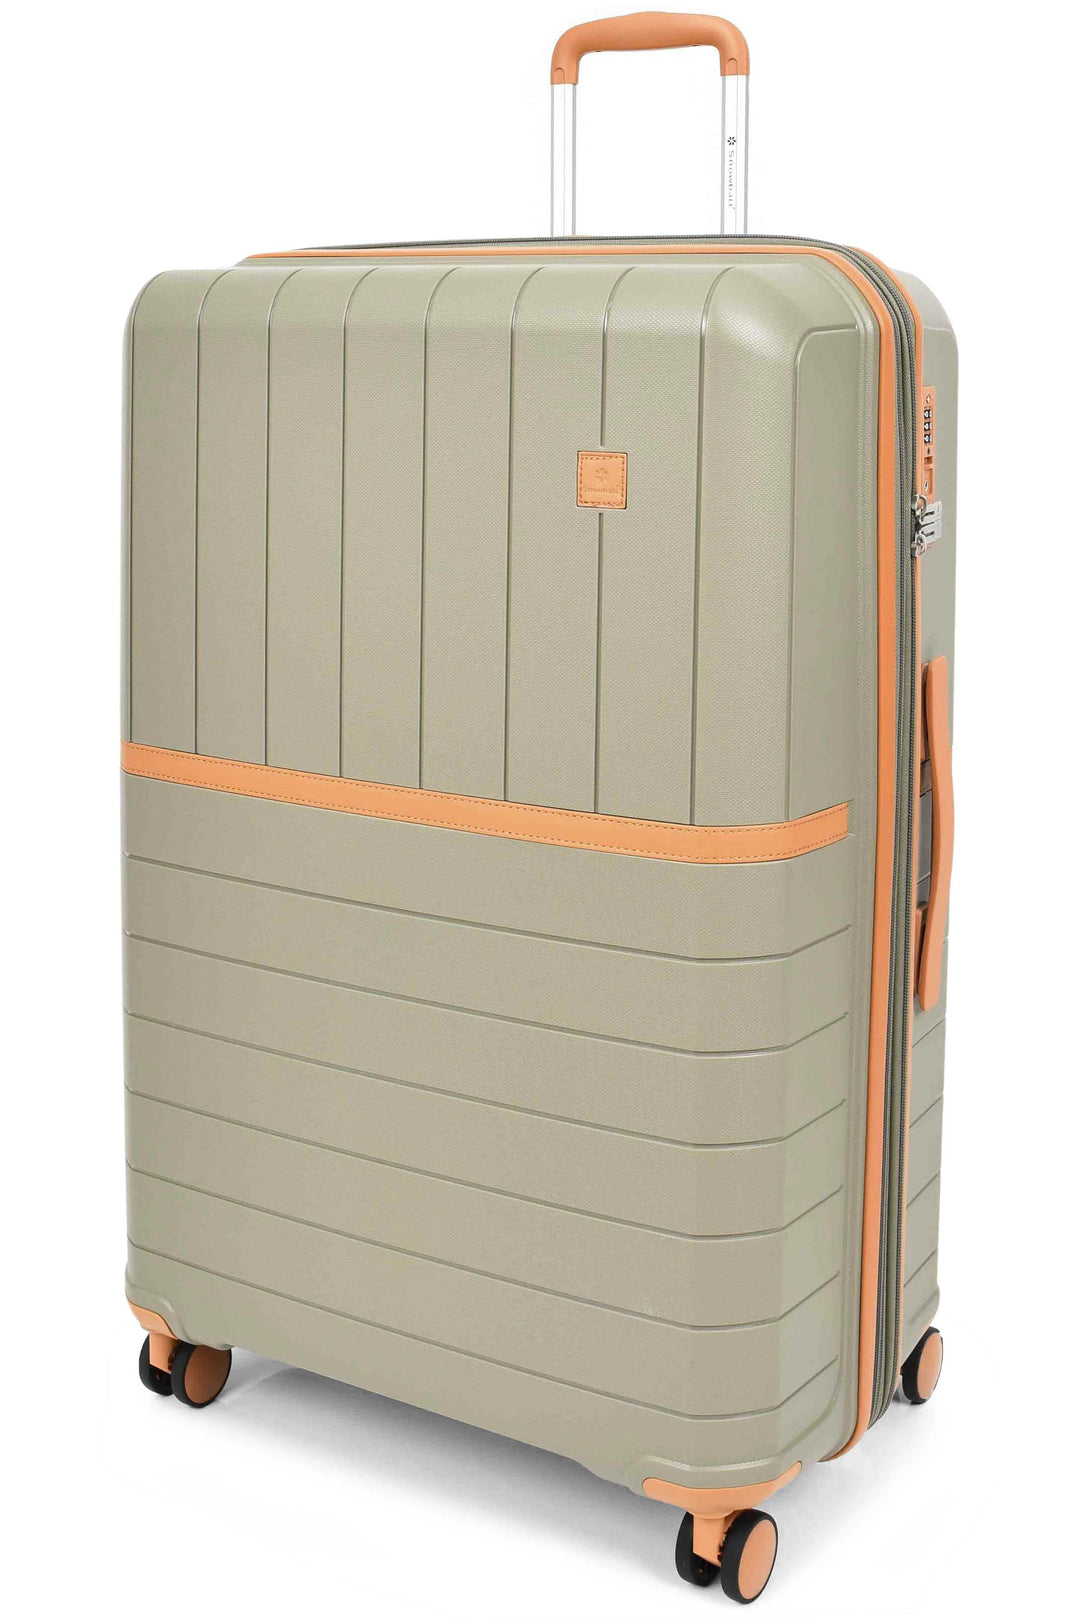 Excursion Hard Shell Suitcase 1